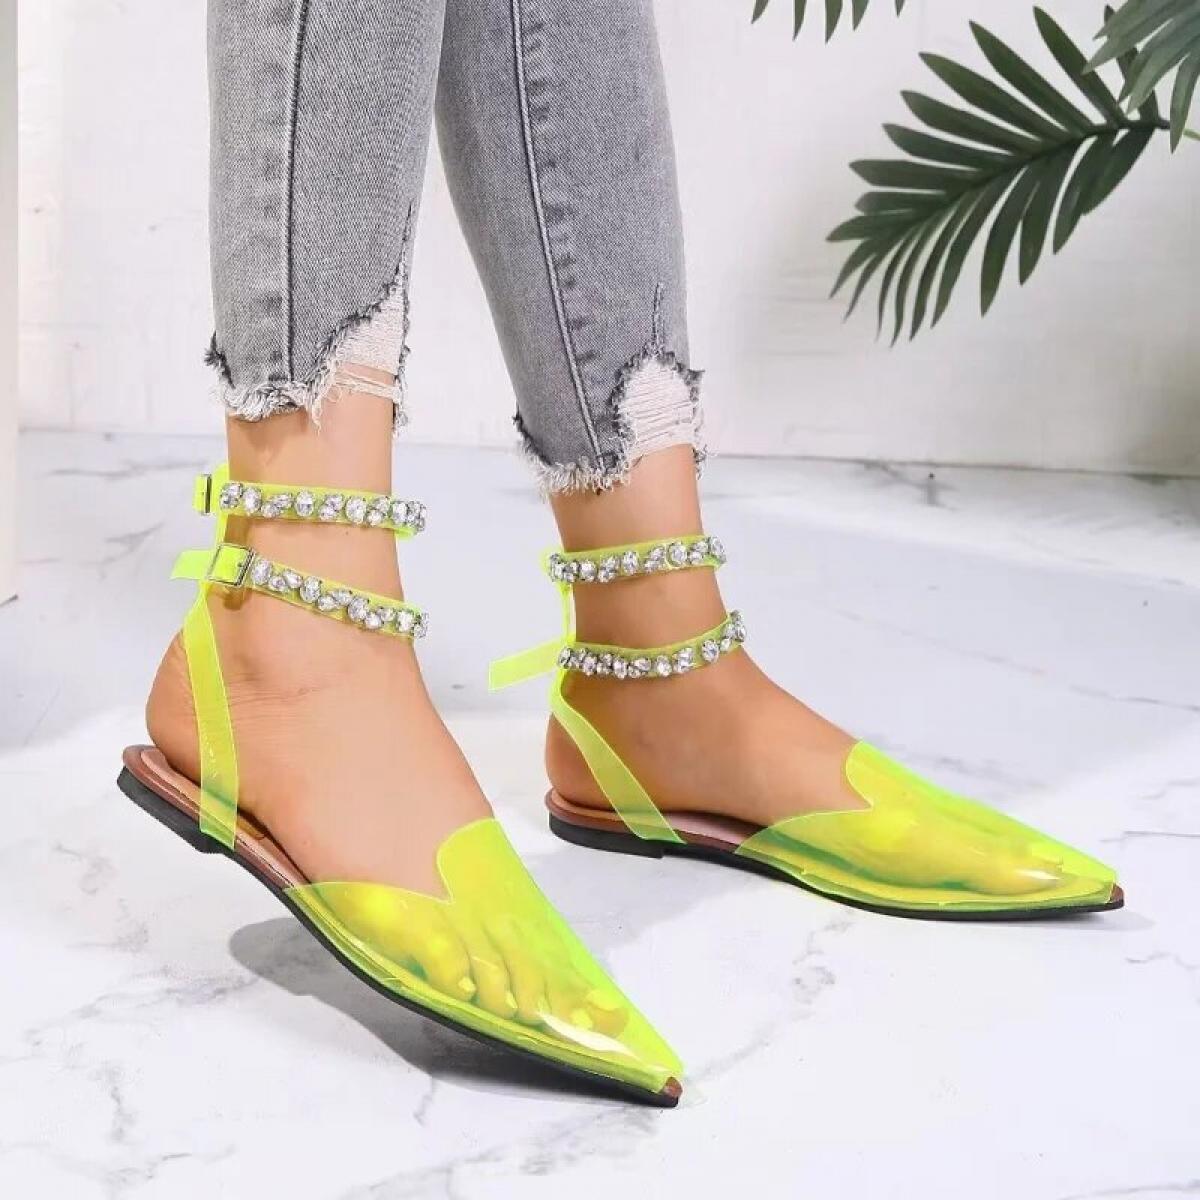 Plus Size Pionted Toe Sandals For Women Summer Flat Shoes New Fashion Plastic Rhinestones Closed Toe Ankle Strap Women's